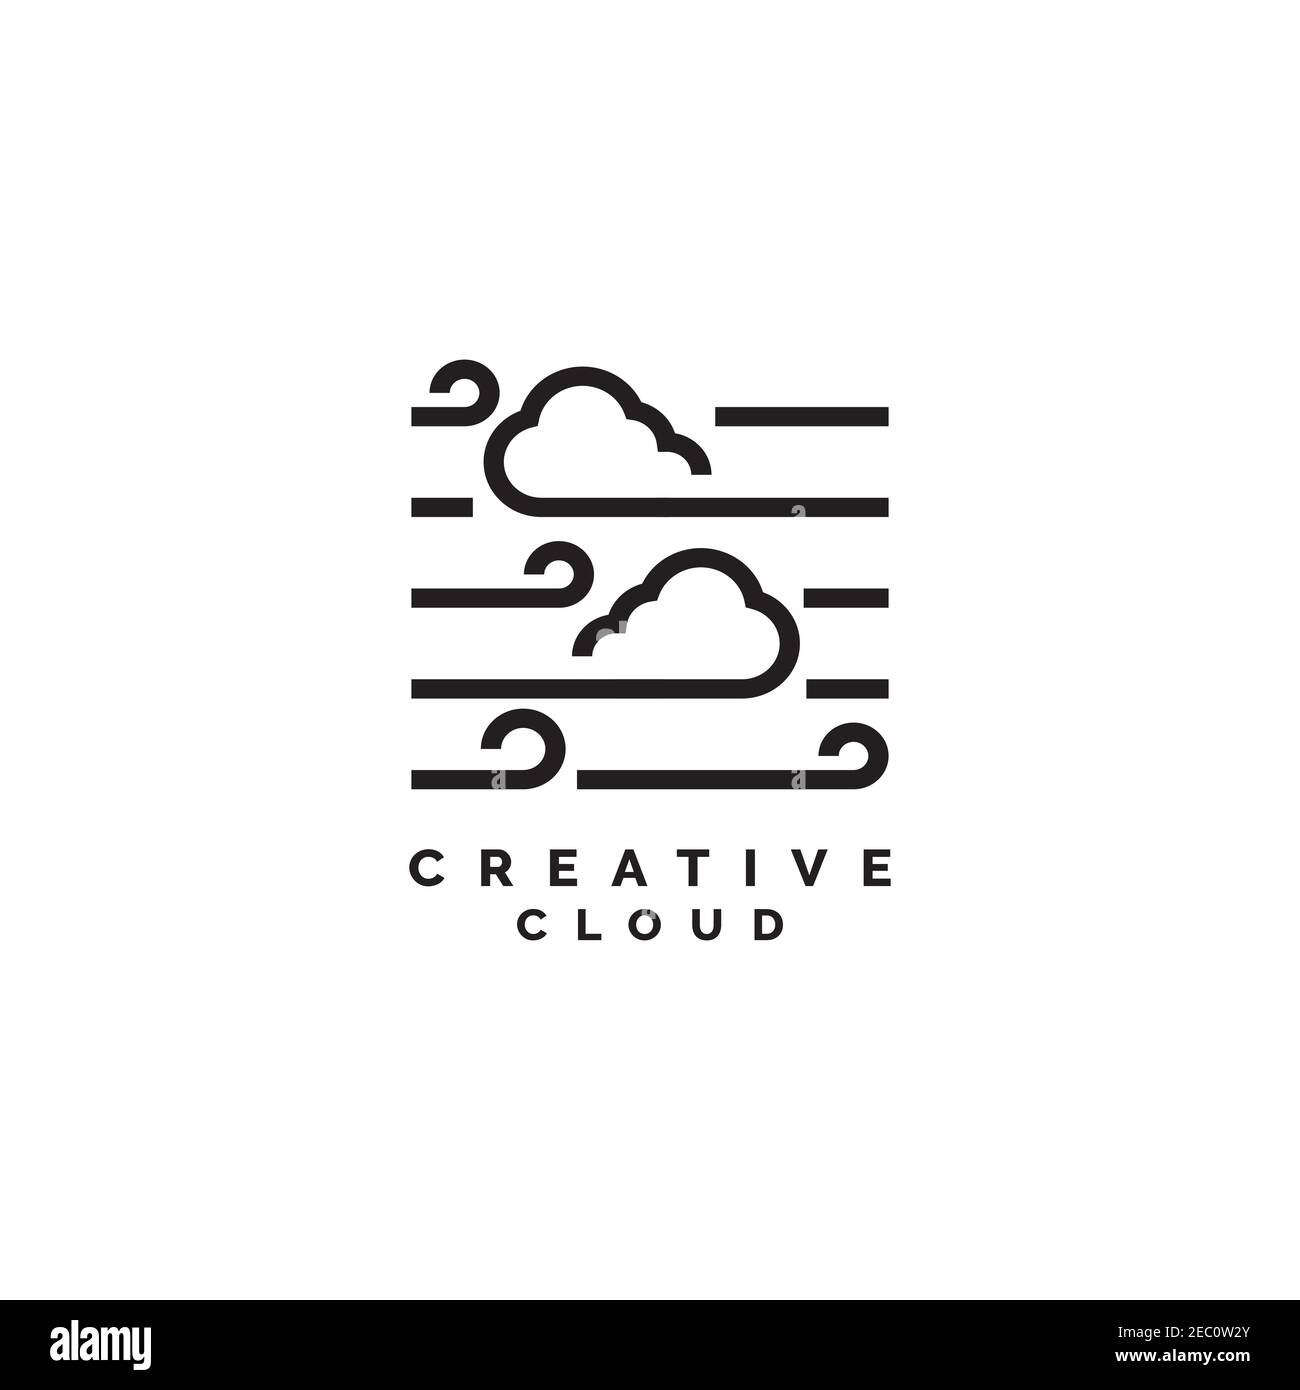 Creative cloud with line style logo design vector template Stock Vector